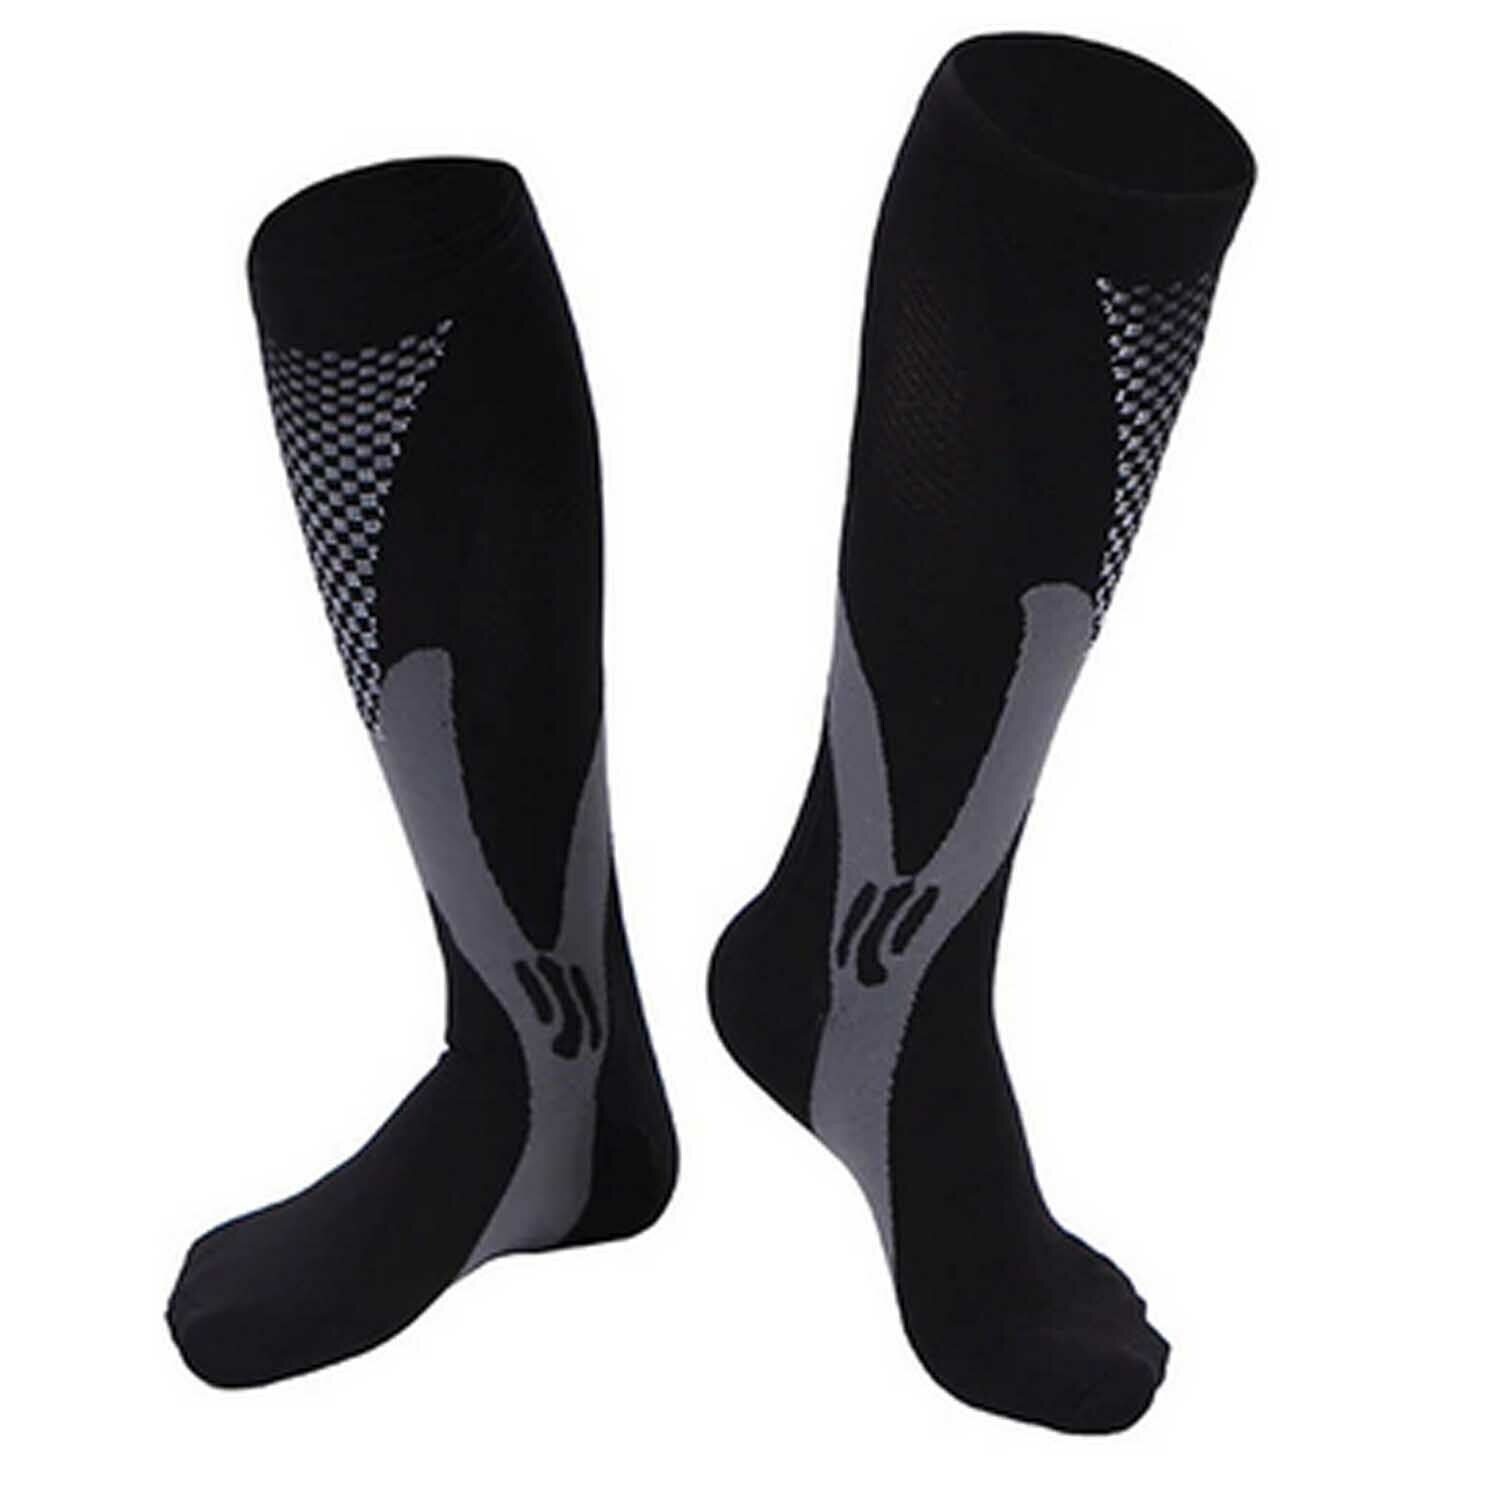 5Pairs Compression Socks Knee High Running Sport Long Stockings Ankle 30-40 mmhg